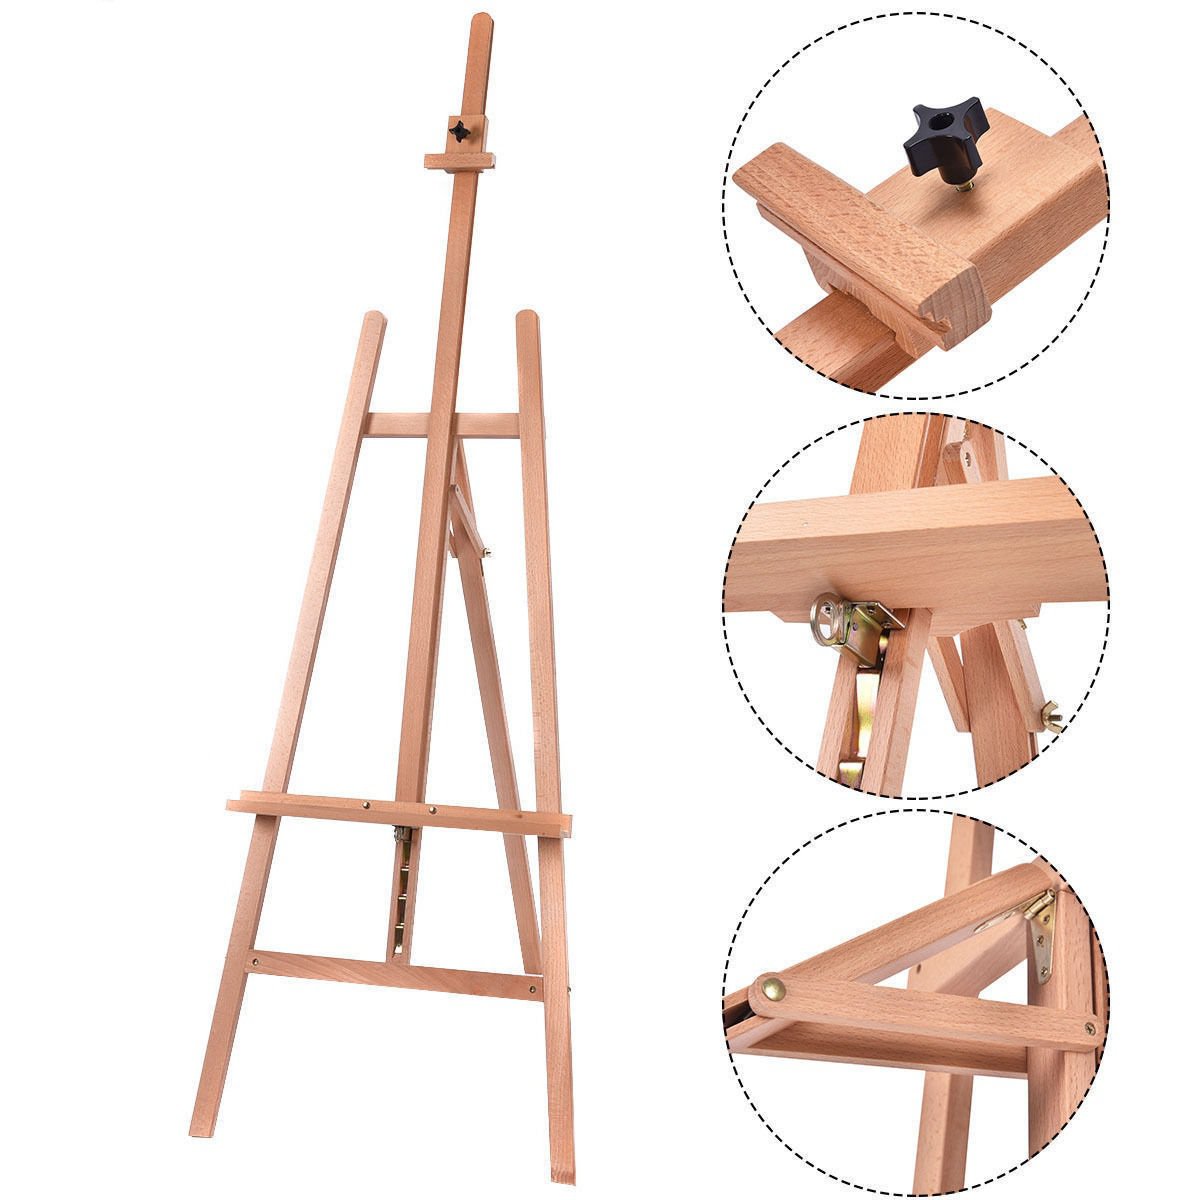 New Simple Wood Wooden Easel Art Stand Drawing Sketching Painting